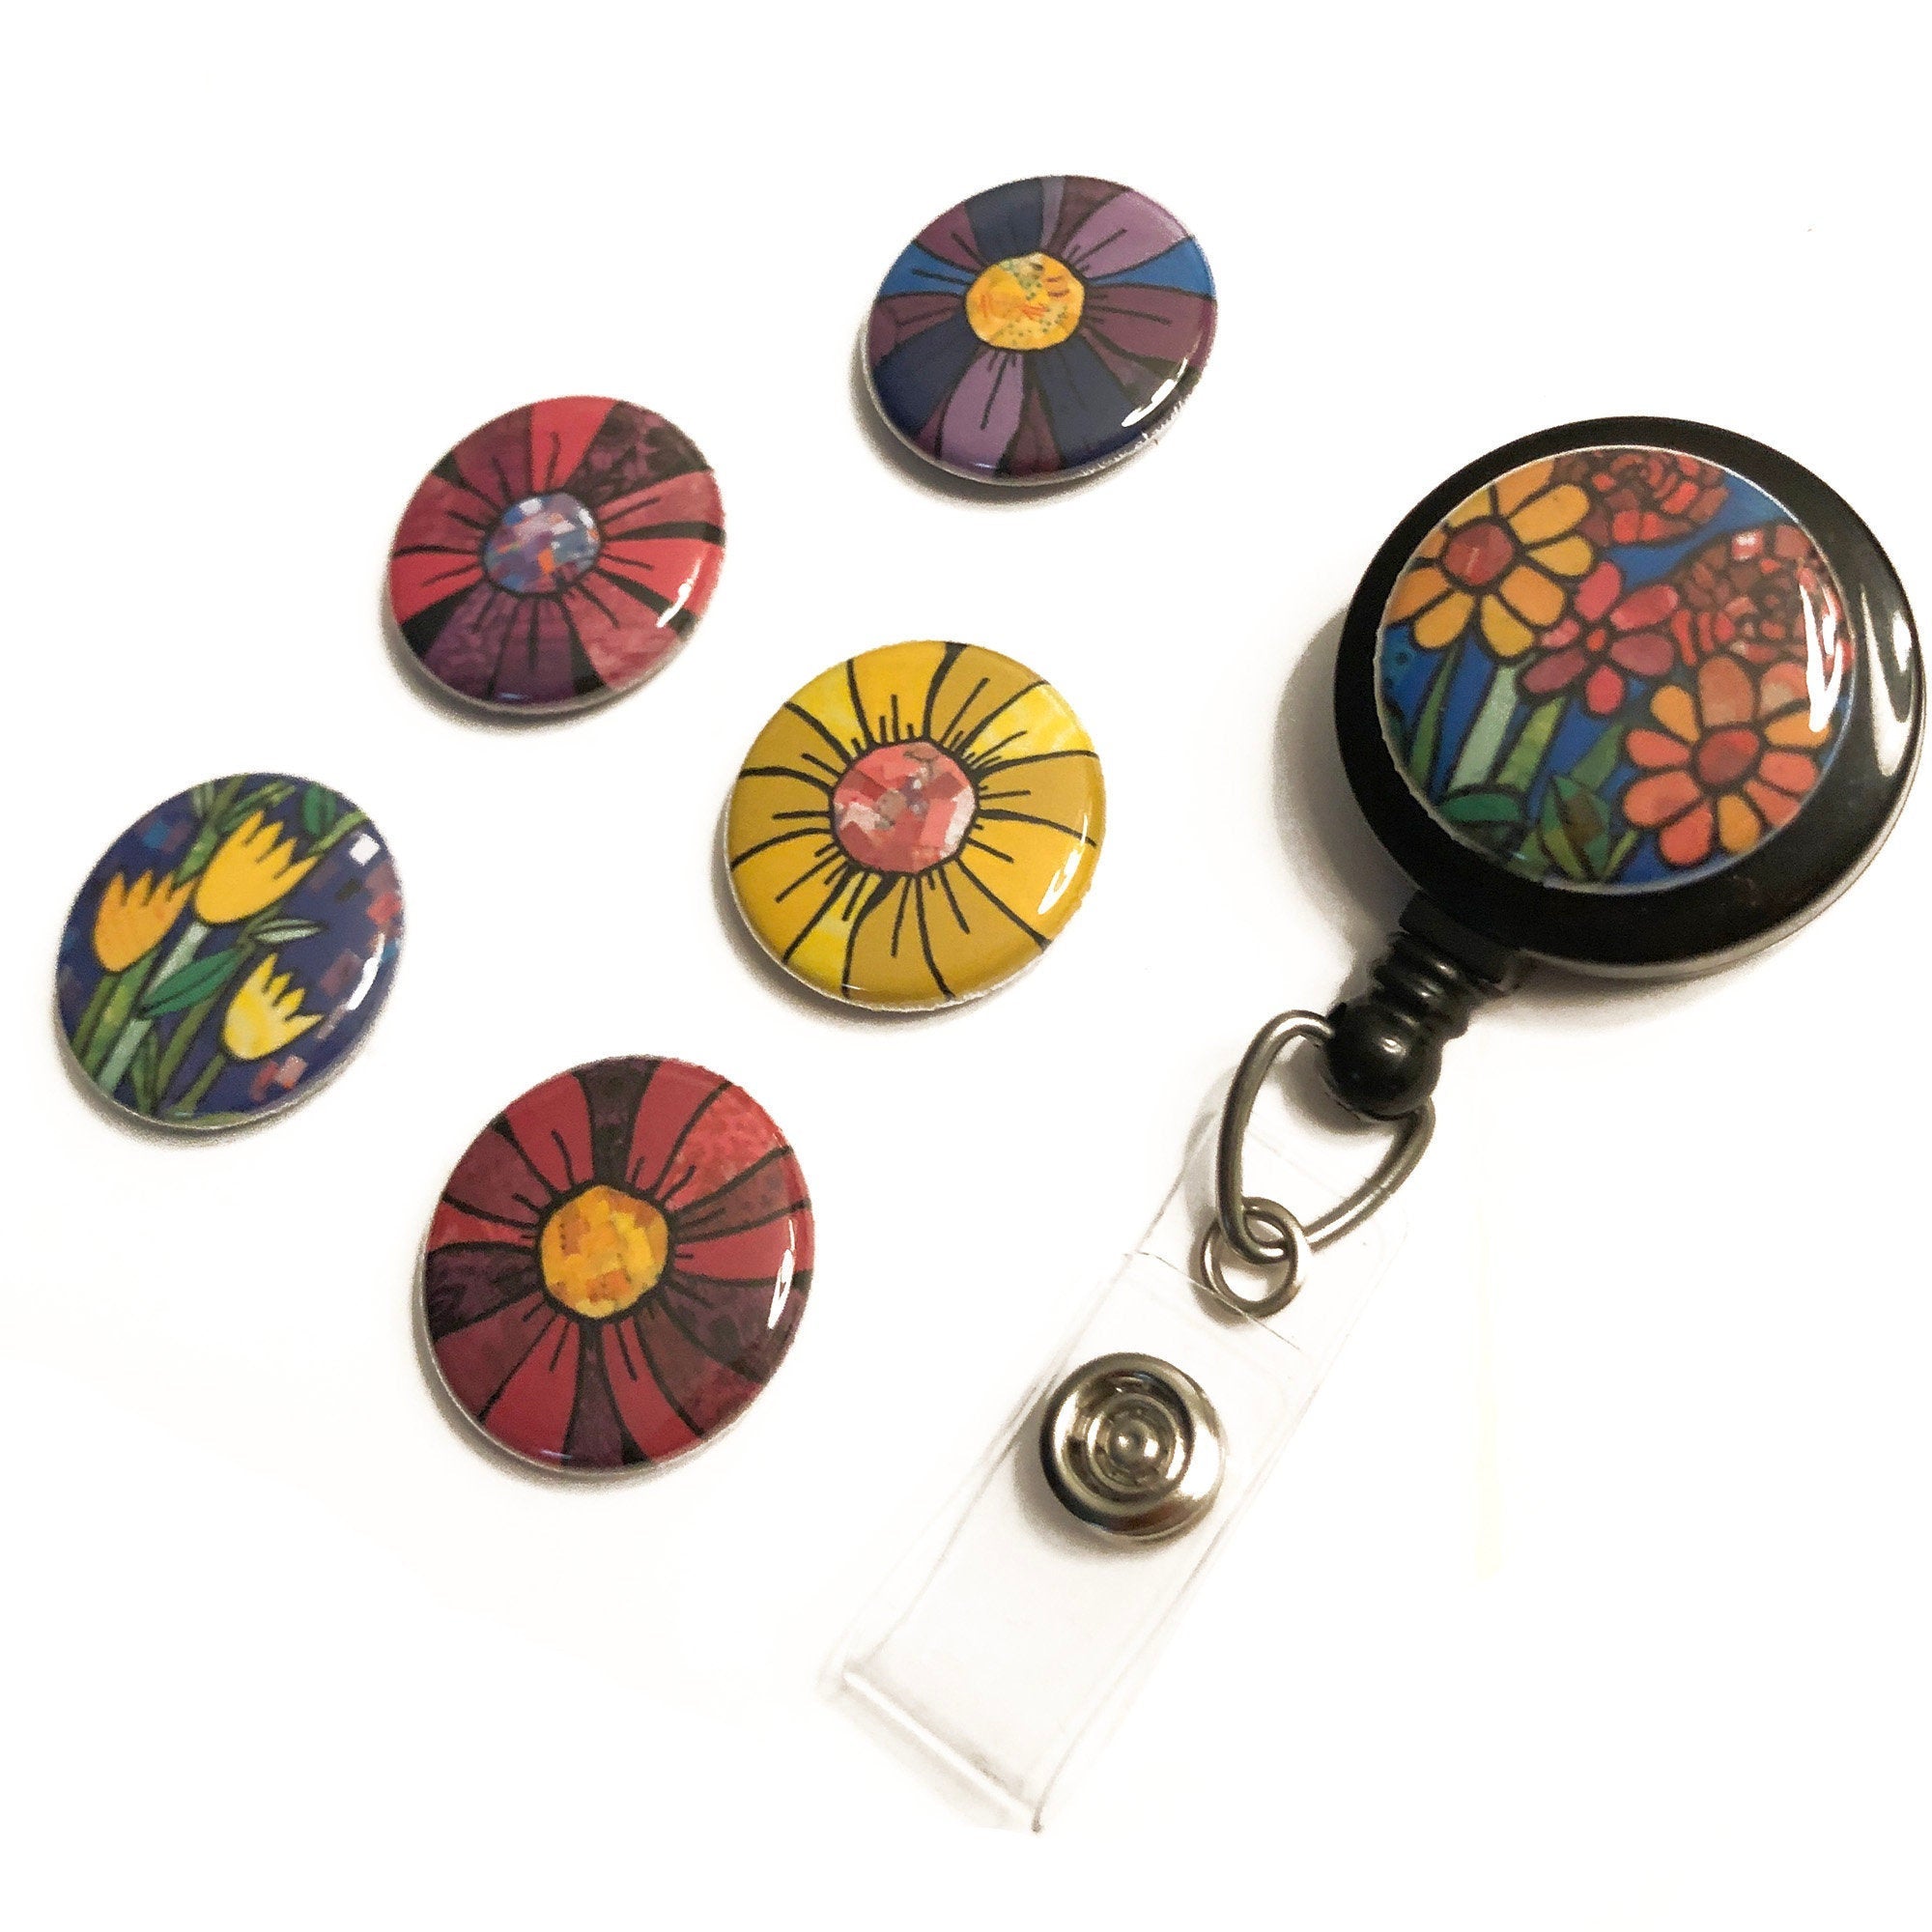 Interchangeable Flower ID Badge Reel or Lanyard - Flower ID Badge Holder with 6 designs, magnetic badge reel, nurse badge holder, work gift